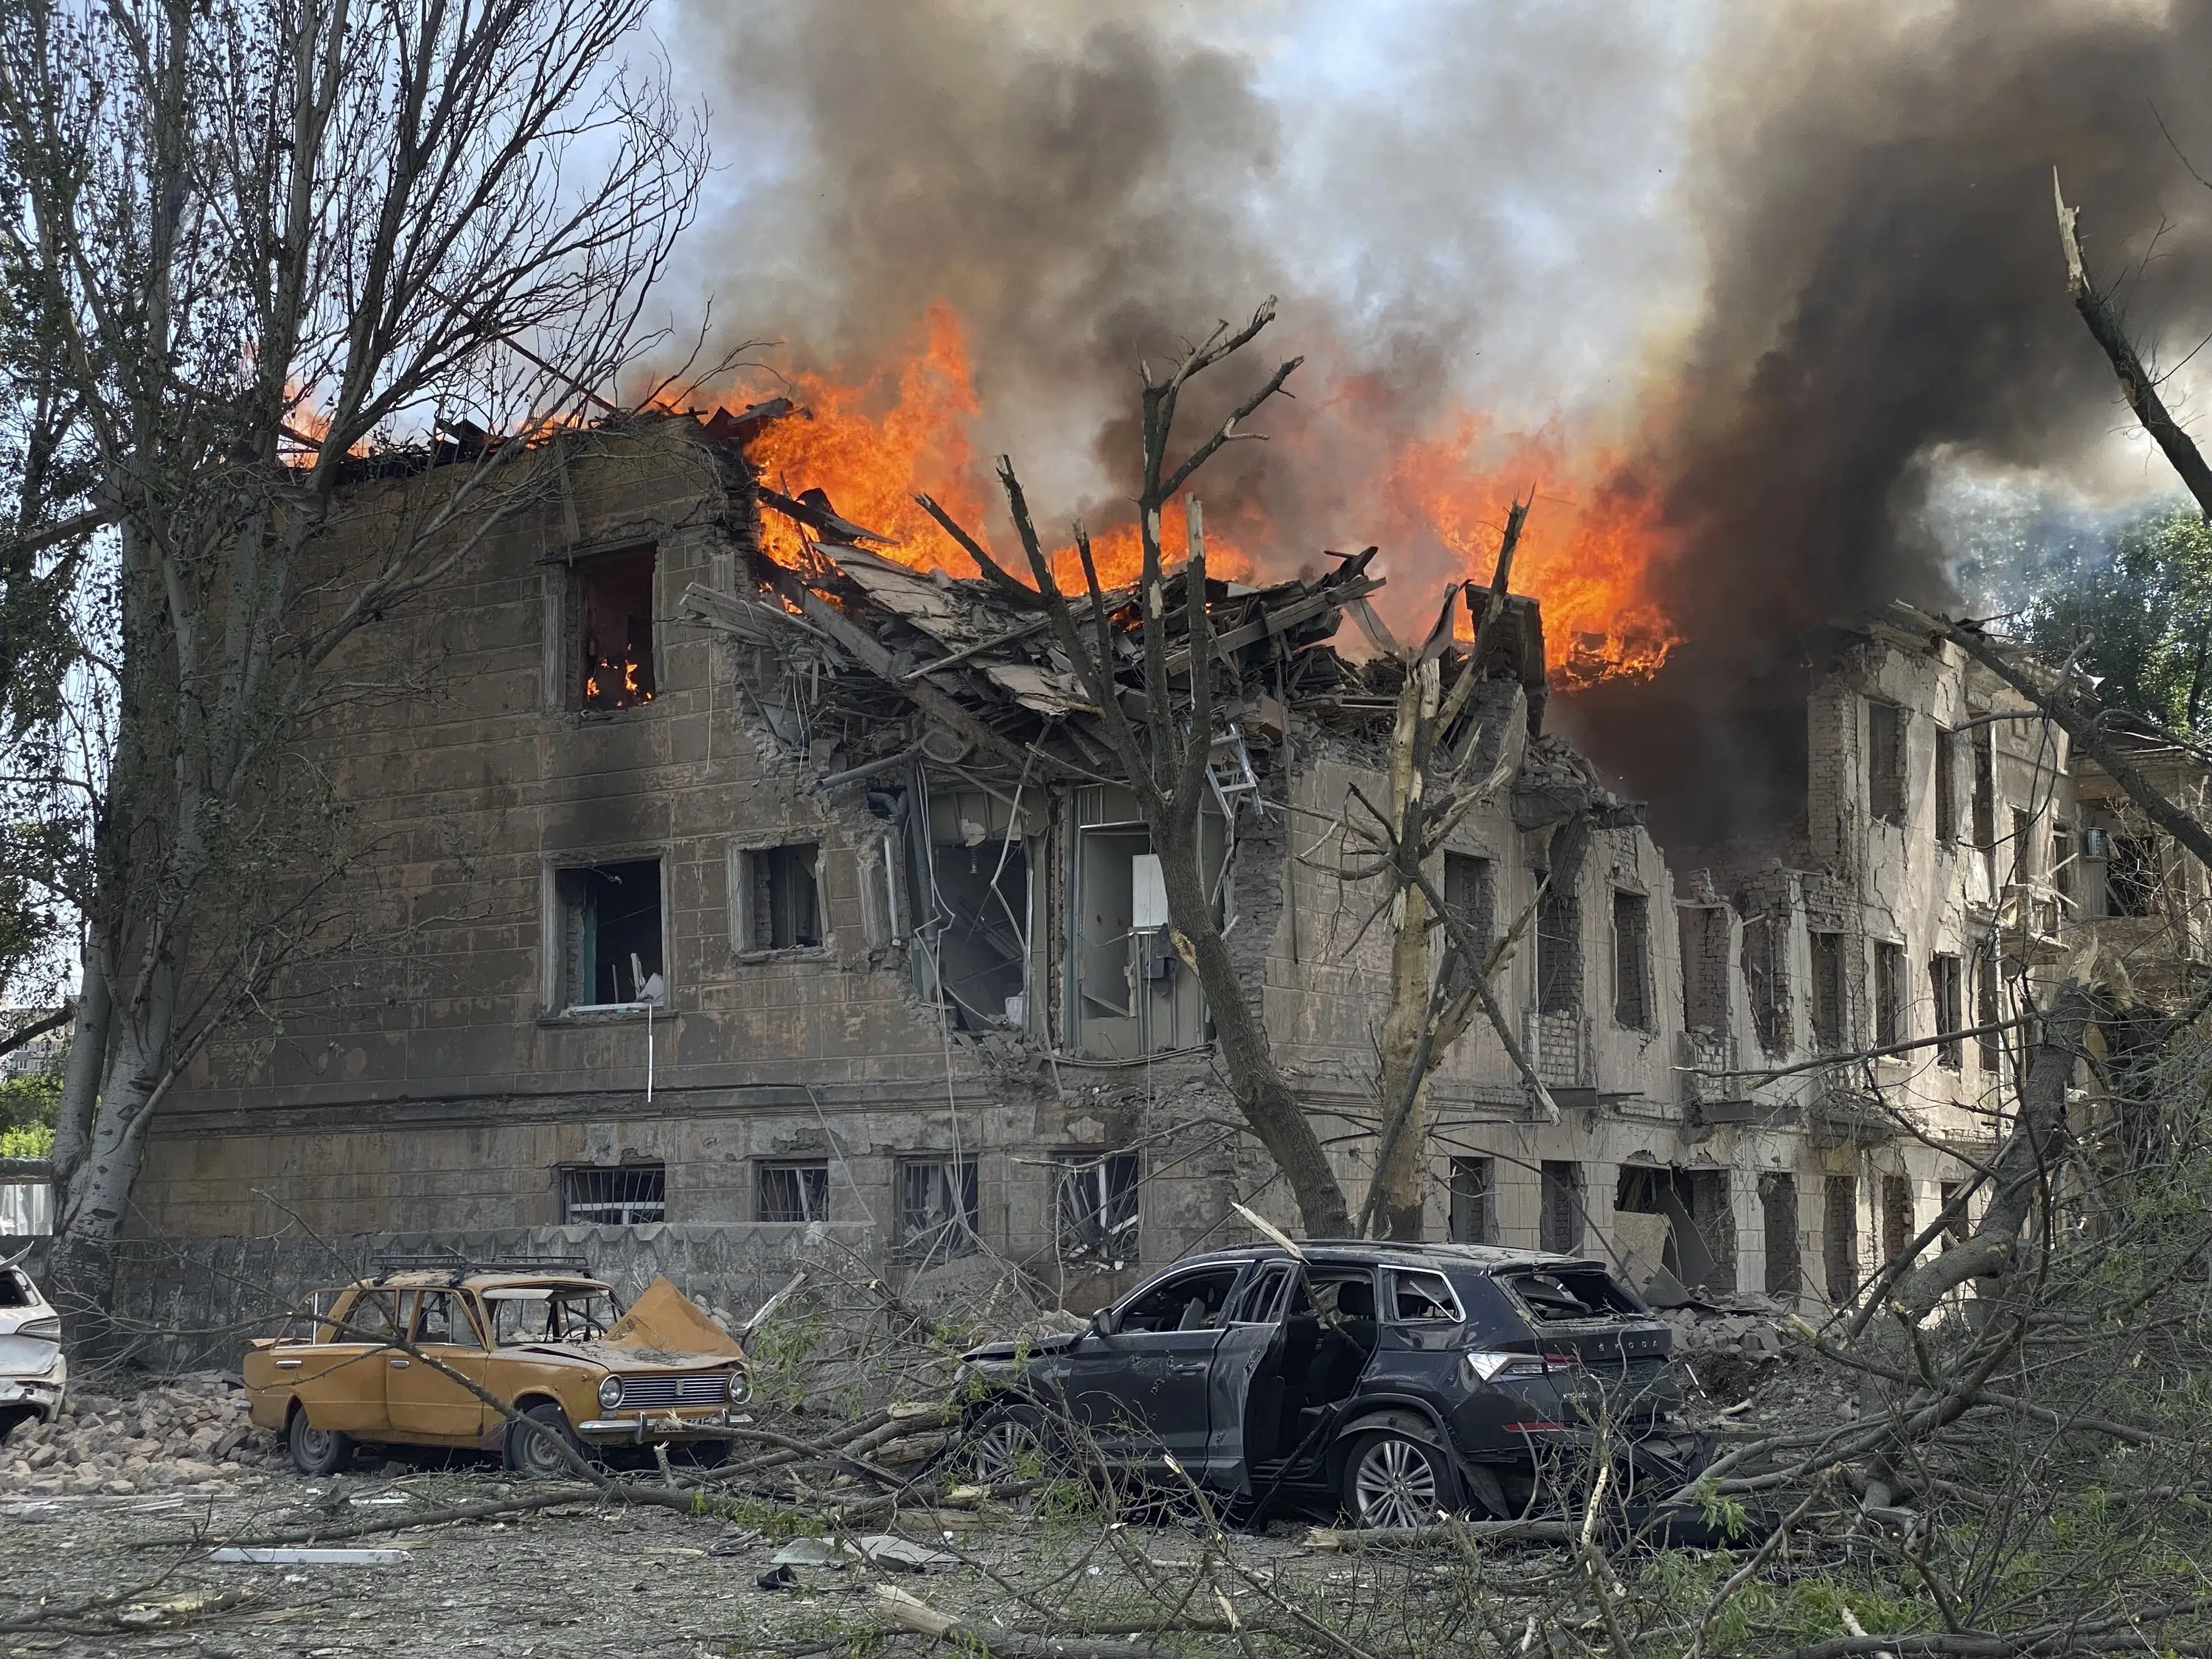 Russia says its border regions attacked; Moscow's forces hit clinic in central Ukrainian city